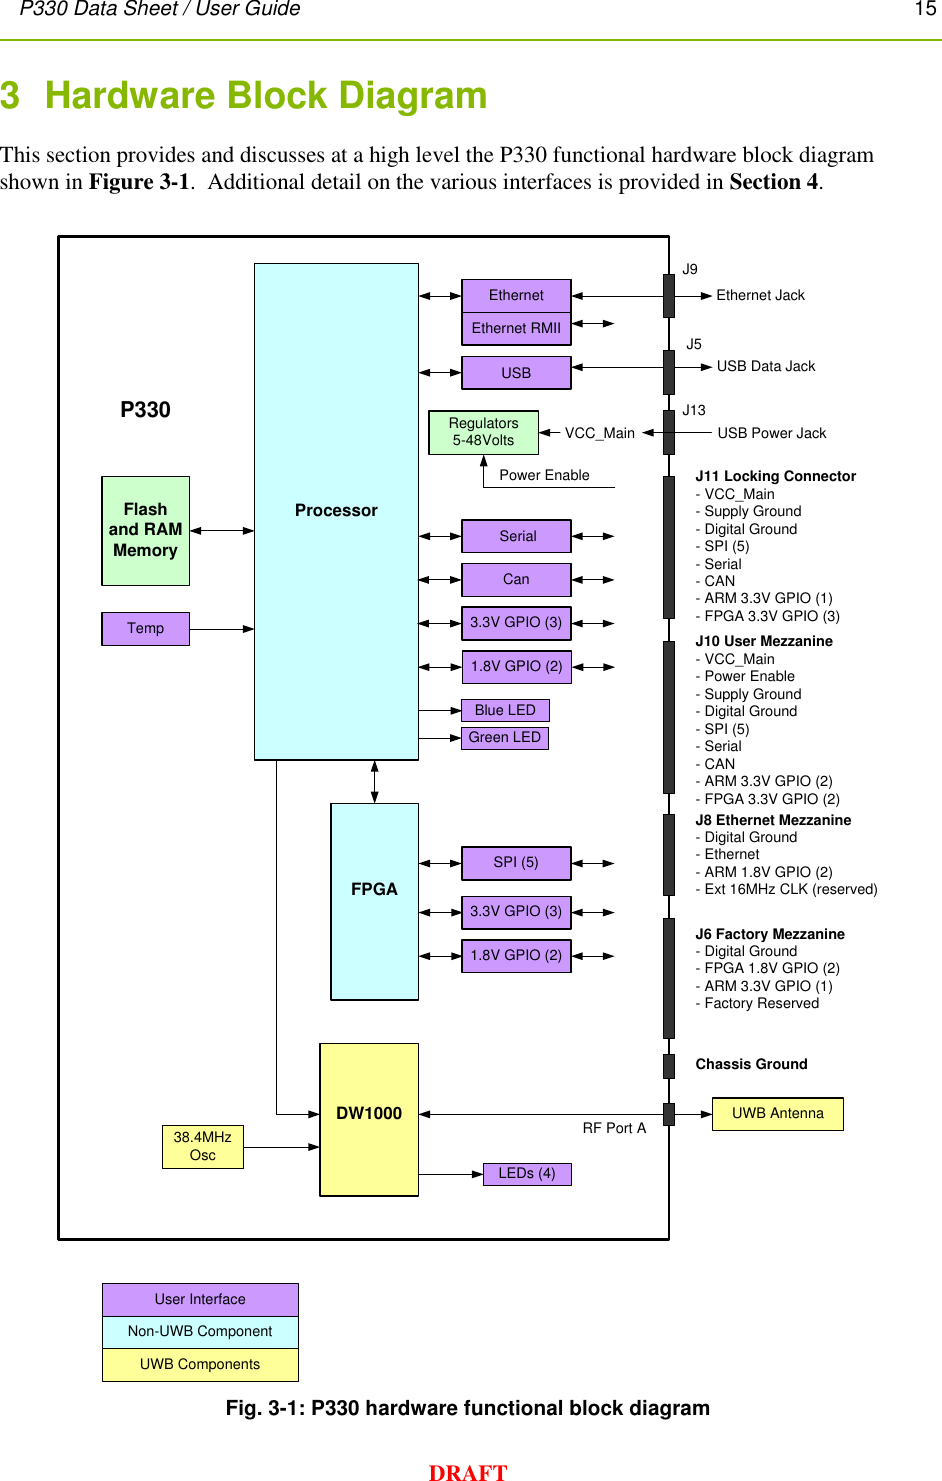 P330 Data Sheet / User Guide       15        DRAFT 3  Hardware Block Diagram This section provides and discusses at a high level the P330 functional hardware block diagram shown in Figure 3-1.  Additional detail on the various interfaces is provided in Section 4.      Fig. 3-1: P330 hardware functional block diagram   DW1000 RF Port AProcessorFPGAP330UWB AntennaTempSerialUSB USB Data JackEthernet JackEthernetCanJ9J5Regulators5-48VoltsFlash and RAMMemoryBlue LED38.4MHzOscUSB Power JackSPI (5)3.3V GPIO (3)3.3V GPIO (3)J10 User Mezzanine- VCC_Main- Power Enable- Supply Ground- Digital Ground- SPI (5)- Serial- CAN- ARM 3.3V GPIO (2)- FPGA 3.3V GPIO (2)J11 Locking Connector- VCC_Main- Supply Ground- Digital Ground- SPI (5)- Serial- CAN- ARM 3.3V GPIO (1)- FPGA 3.3V GPIO (3)Power EnableEthernet RMIIJ13J8 Ethernet Mezzanine- Digital Ground- Ethernet- ARM 1.8V GPIO (2)- Ext 16MHz CLK (reserved)1.8V GPIO (2)1.8V GPIO (2)J6 Factory Mezzanine- Digital Ground- FPGA 1.8V GPIO (2)- ARM 3.3V GPIO (1)- Factory ReservedChassis GroundVCC_Main Green LEDUWB ComponentsNon-UWB ComponentUser InterfaceLEDs (4)  